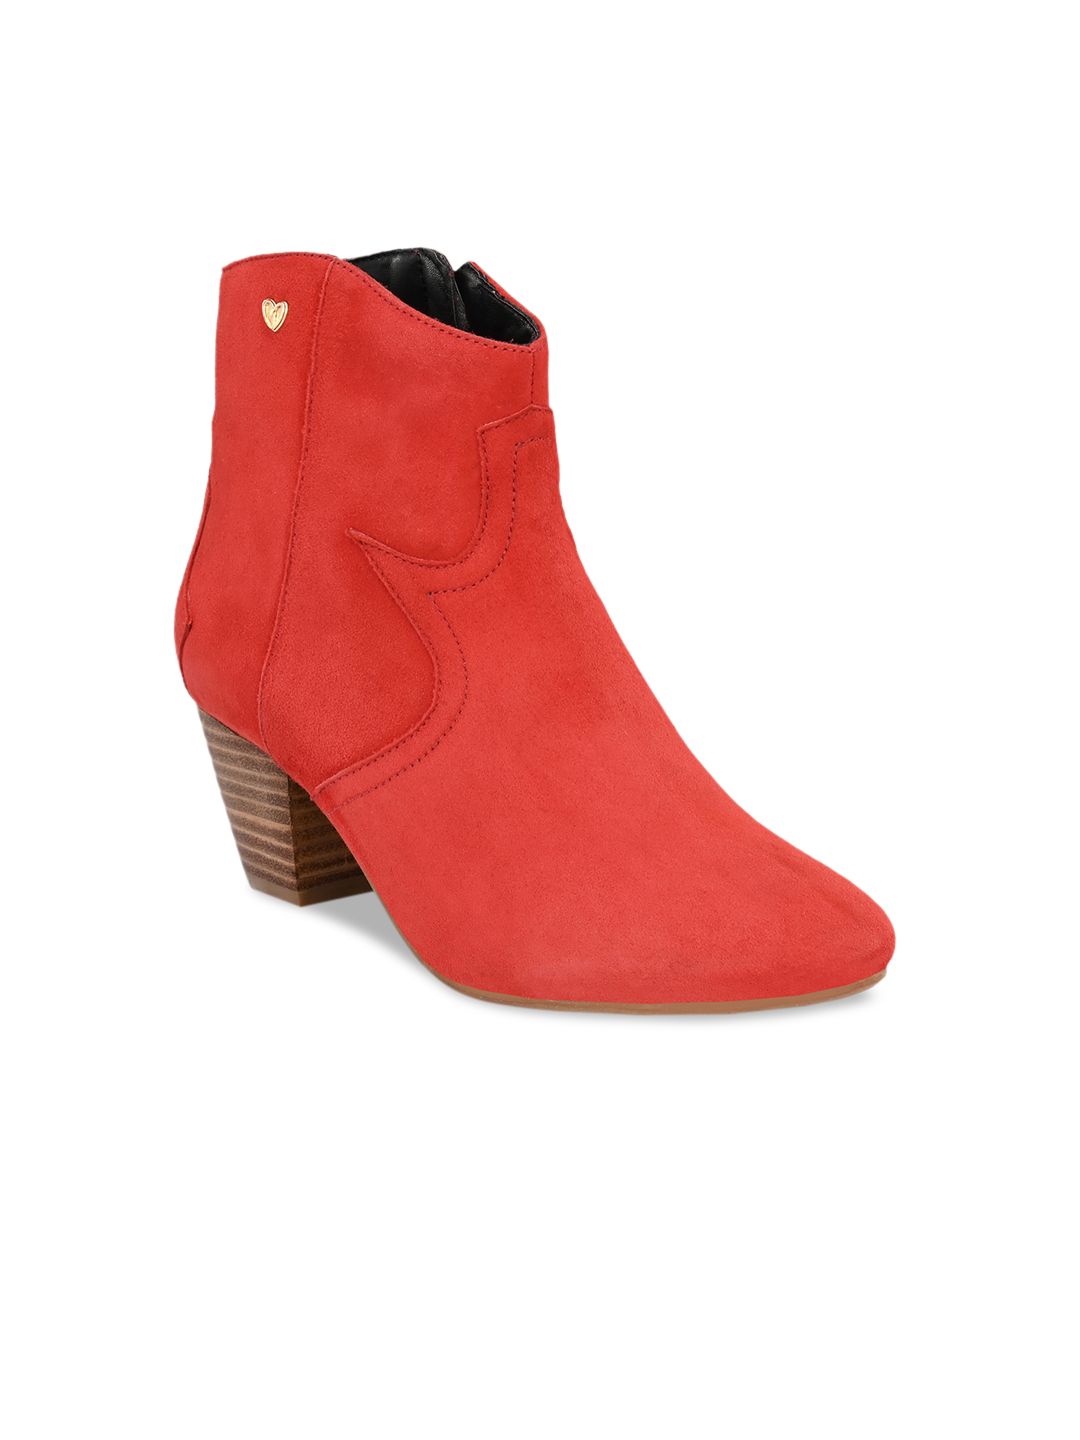 Delize Red Suede Party High-Top Block Heeled Boots Price in India